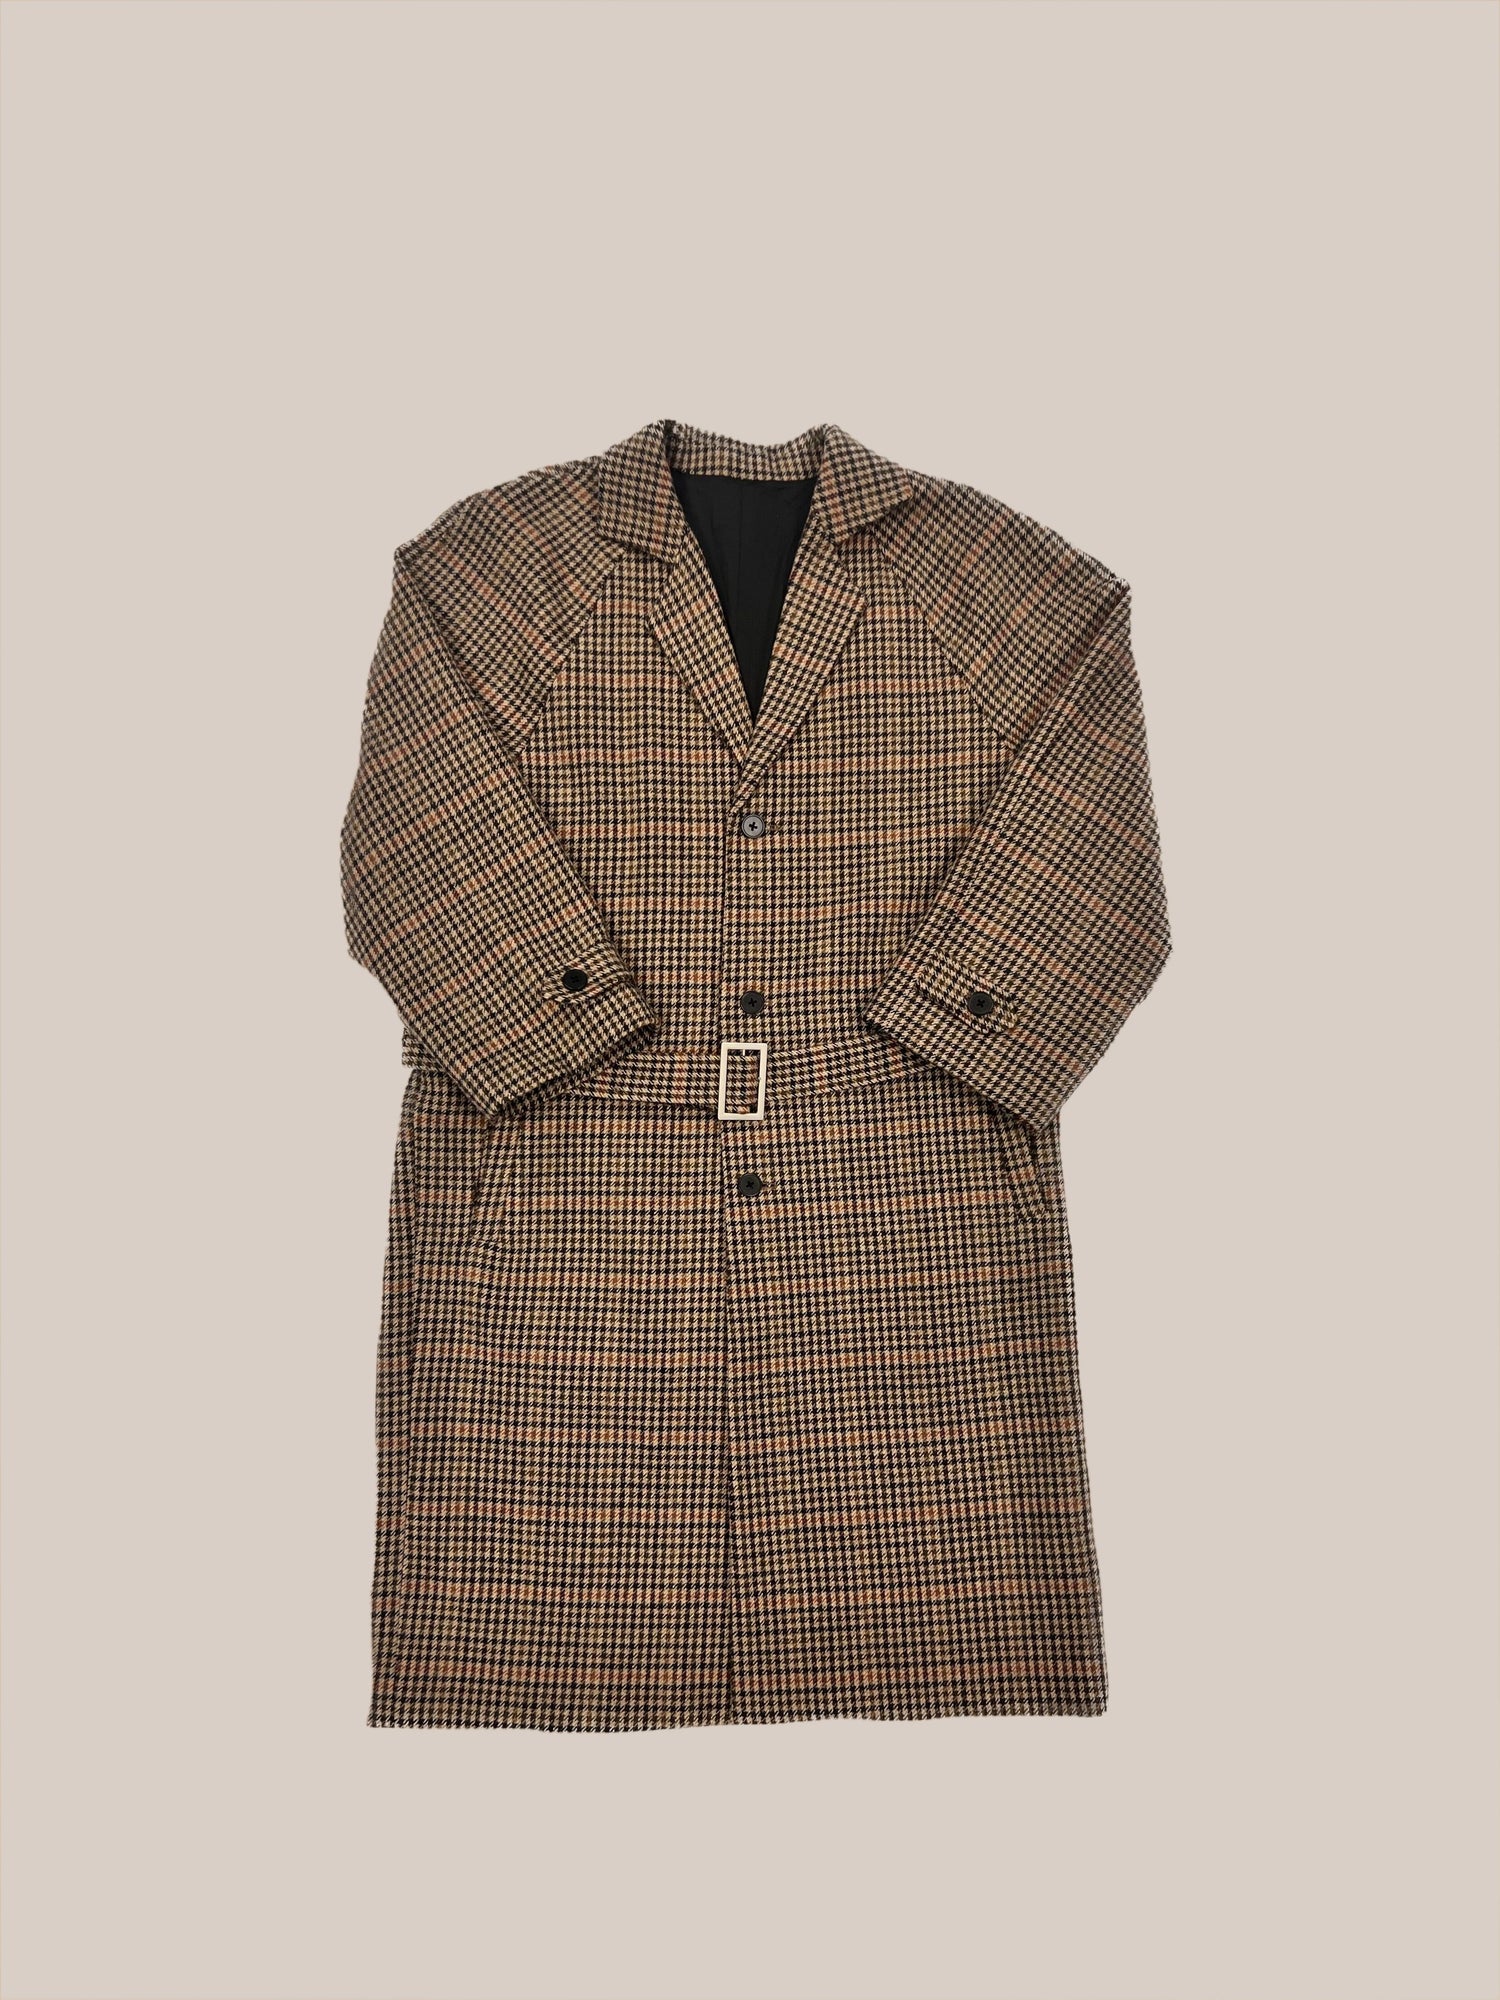 Houndstooth coat with a Profound Sample 4 displayed on a neutral background.